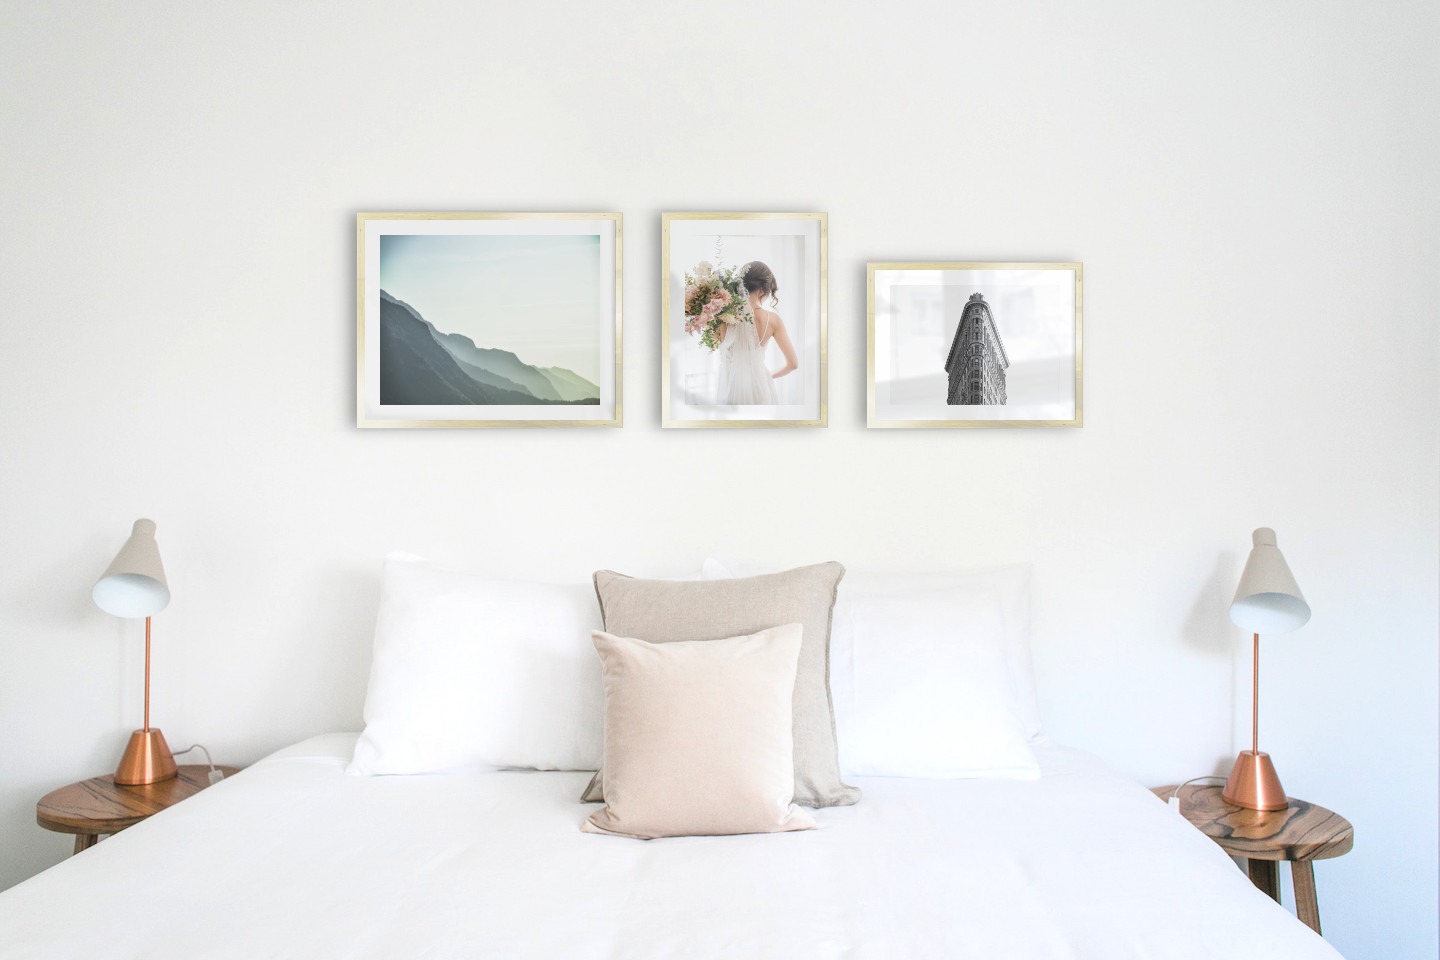 Gallery wall with picture frames in gold in sizes 40x50 and 30x40 with prints "Foggy mountain", "Bride and flowers" and "Triangular building"